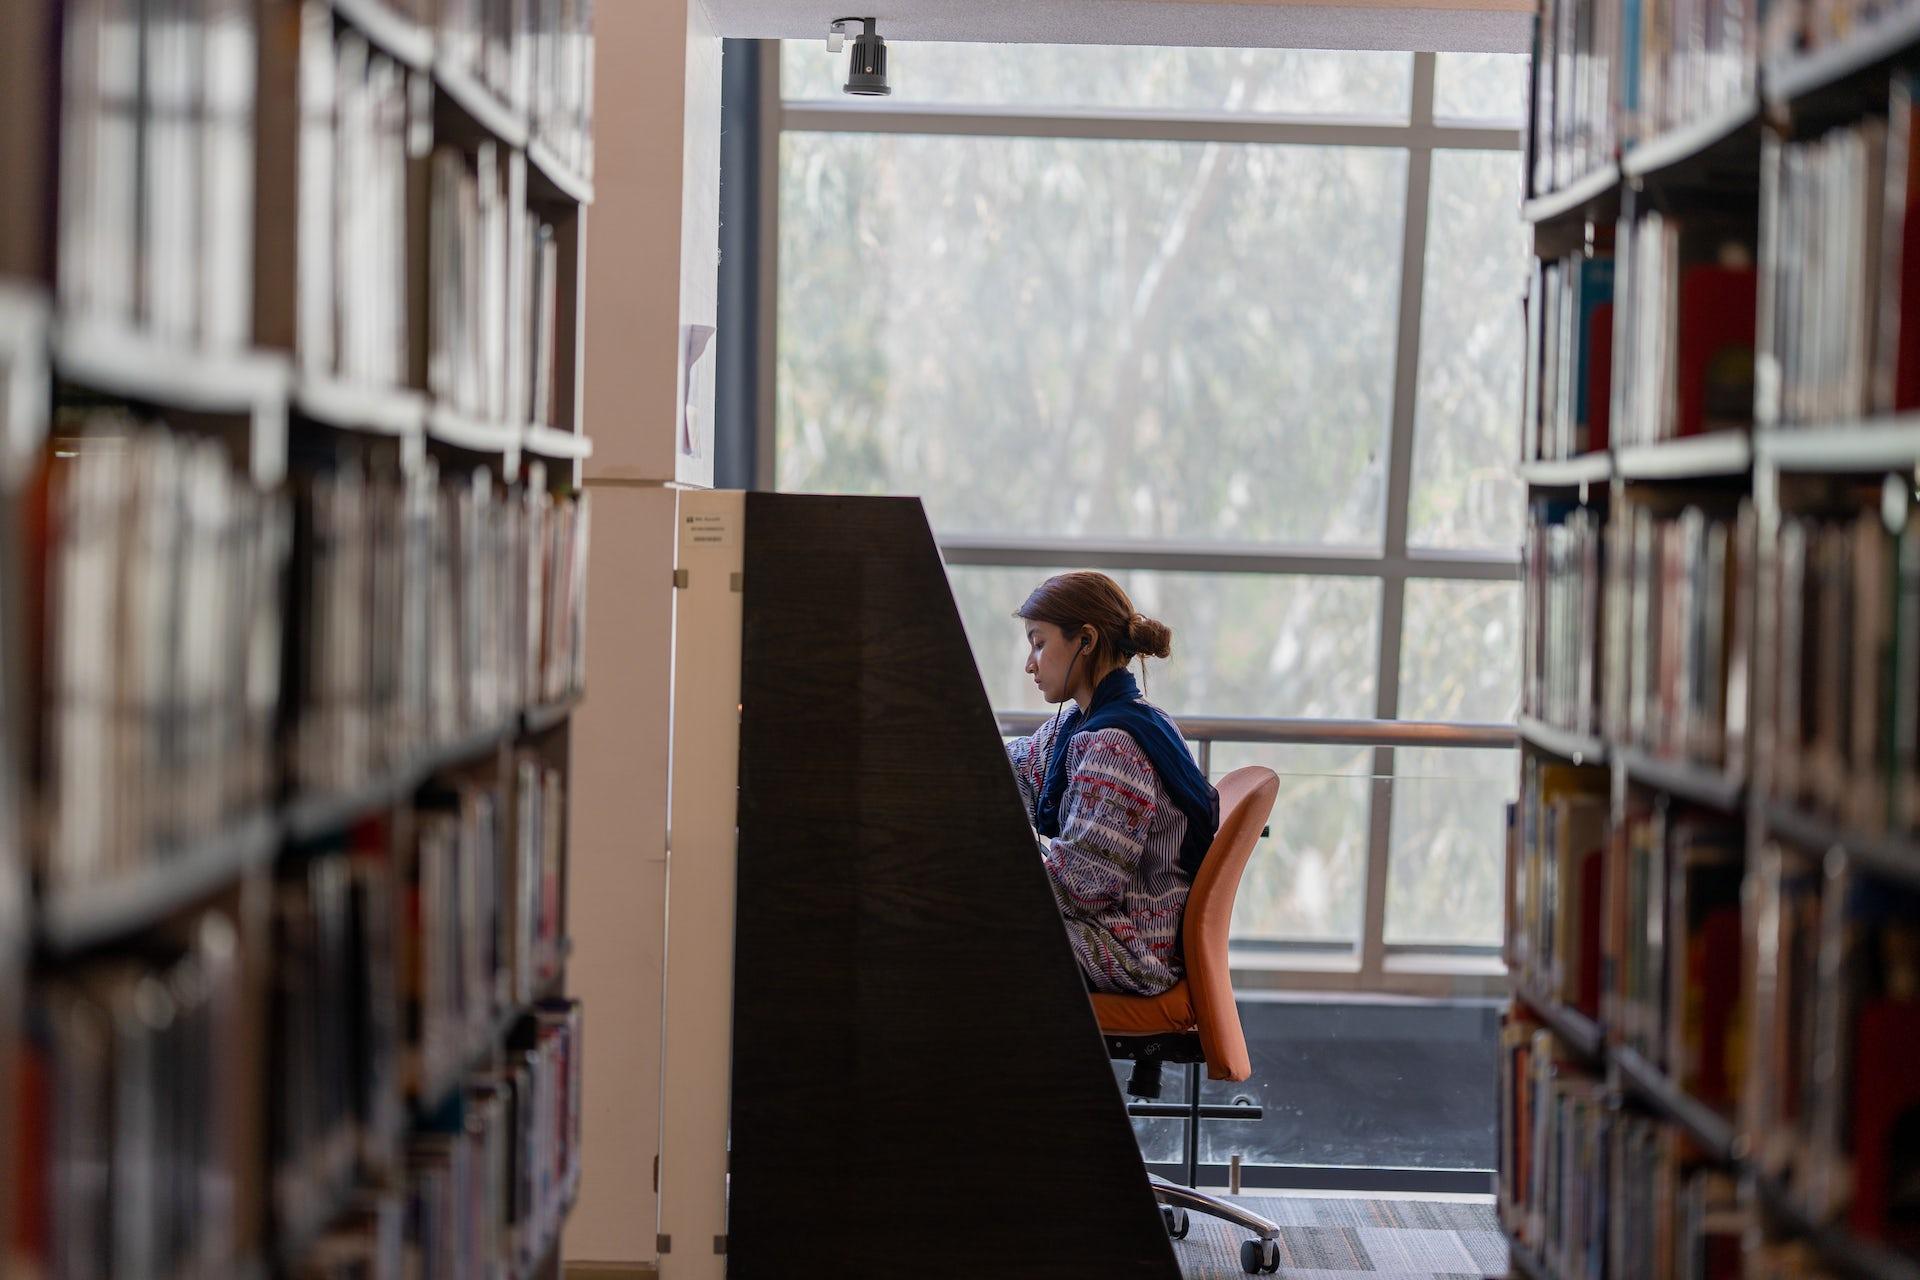 A woman working at a carrel in library stacks